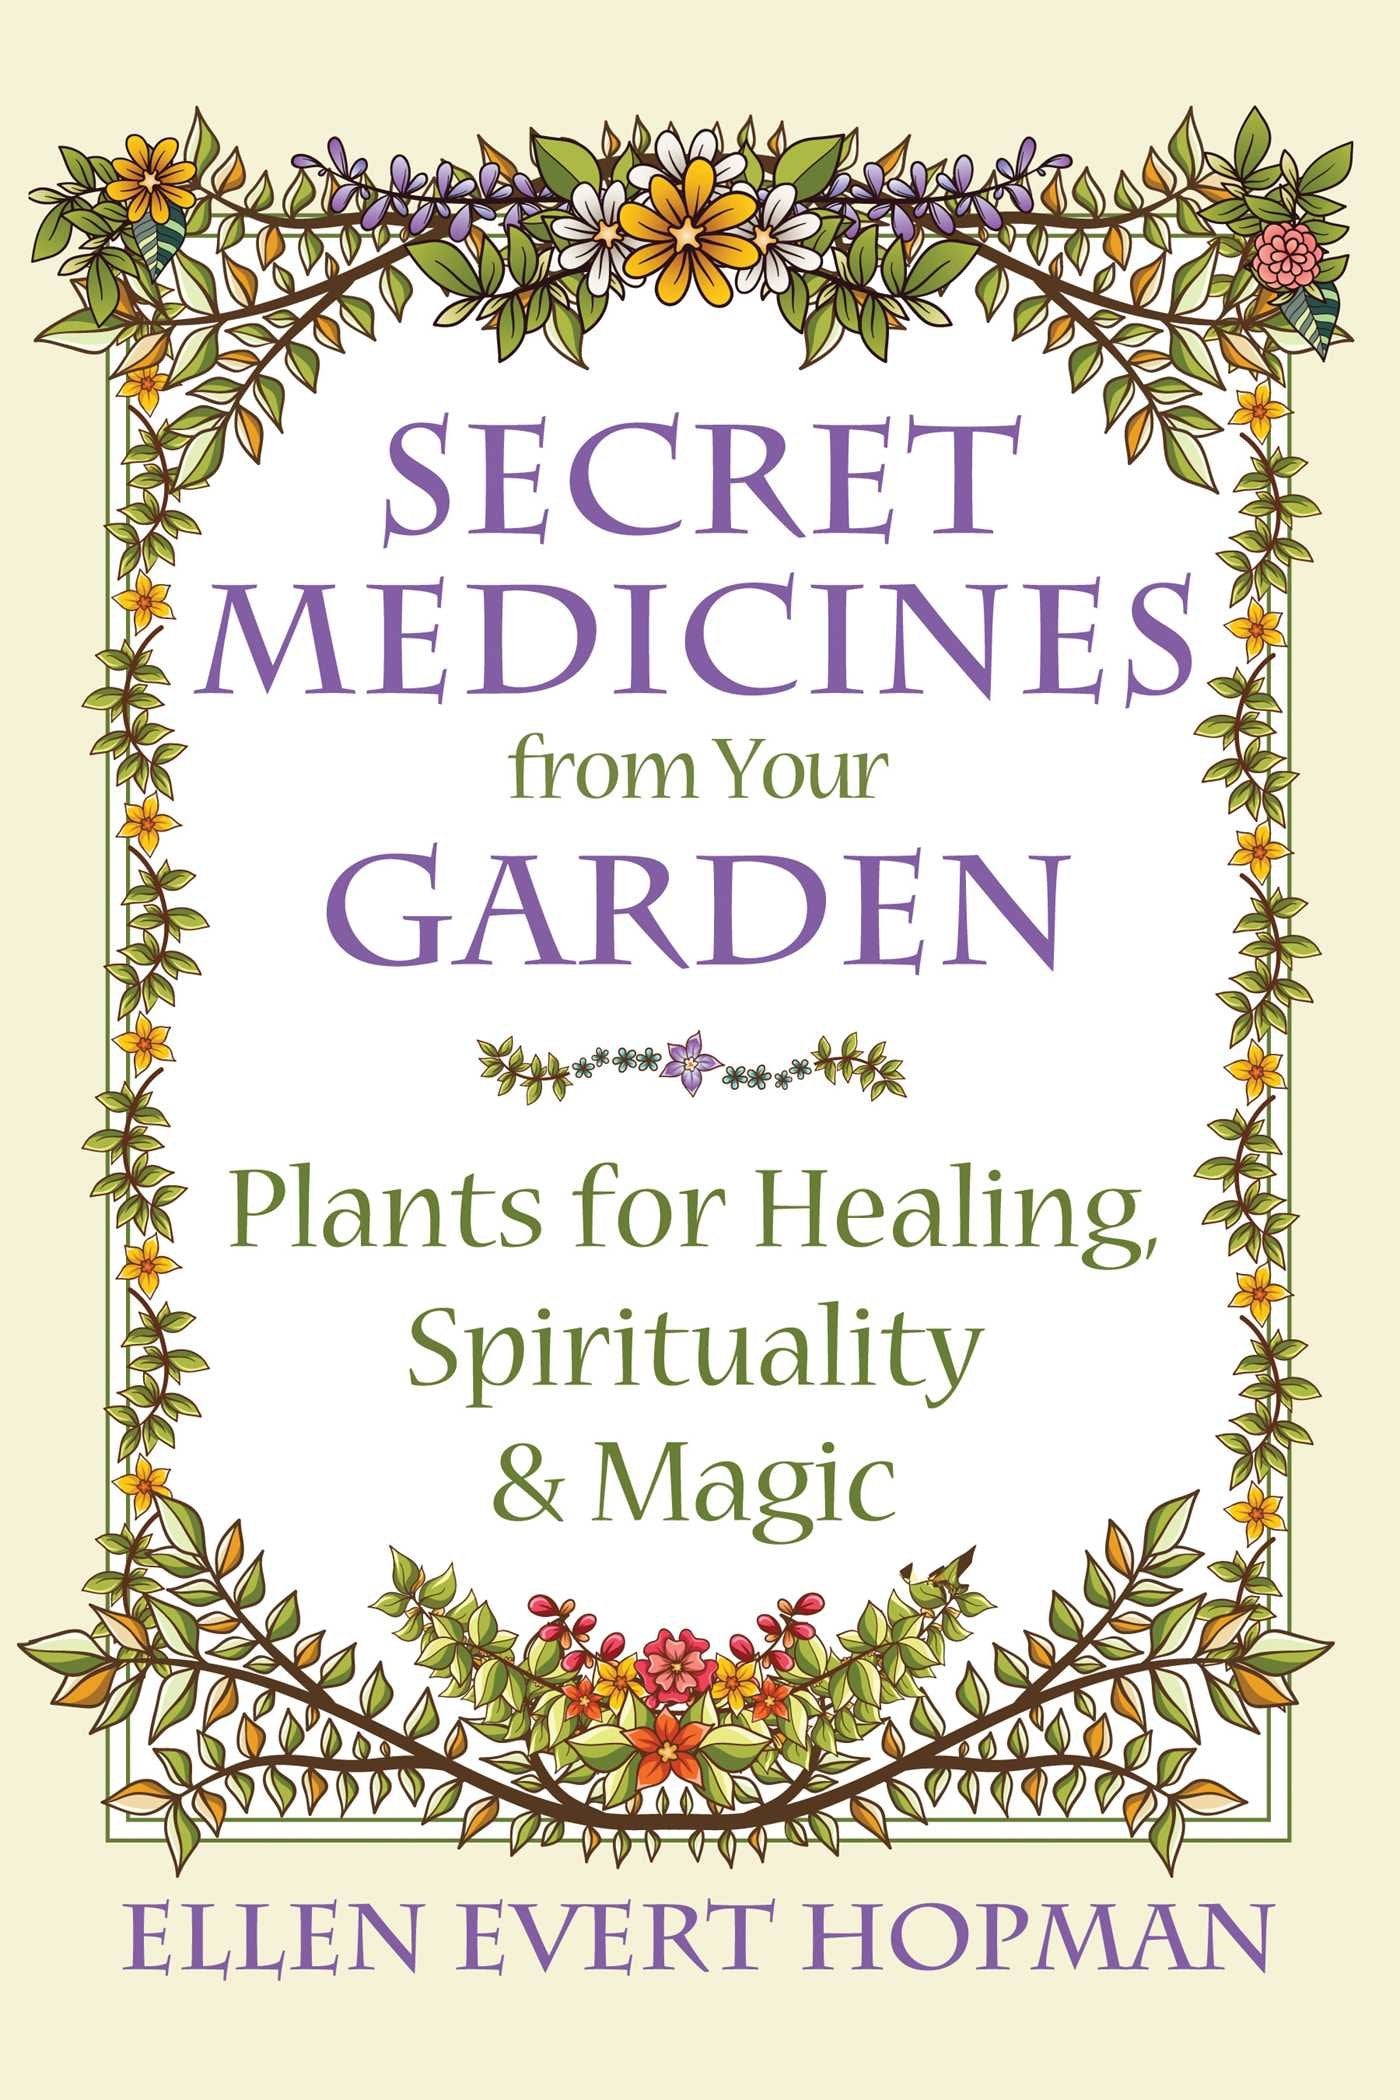 Secret Medicines from Your Garden: Plants for Healing, Spirituality & Magic